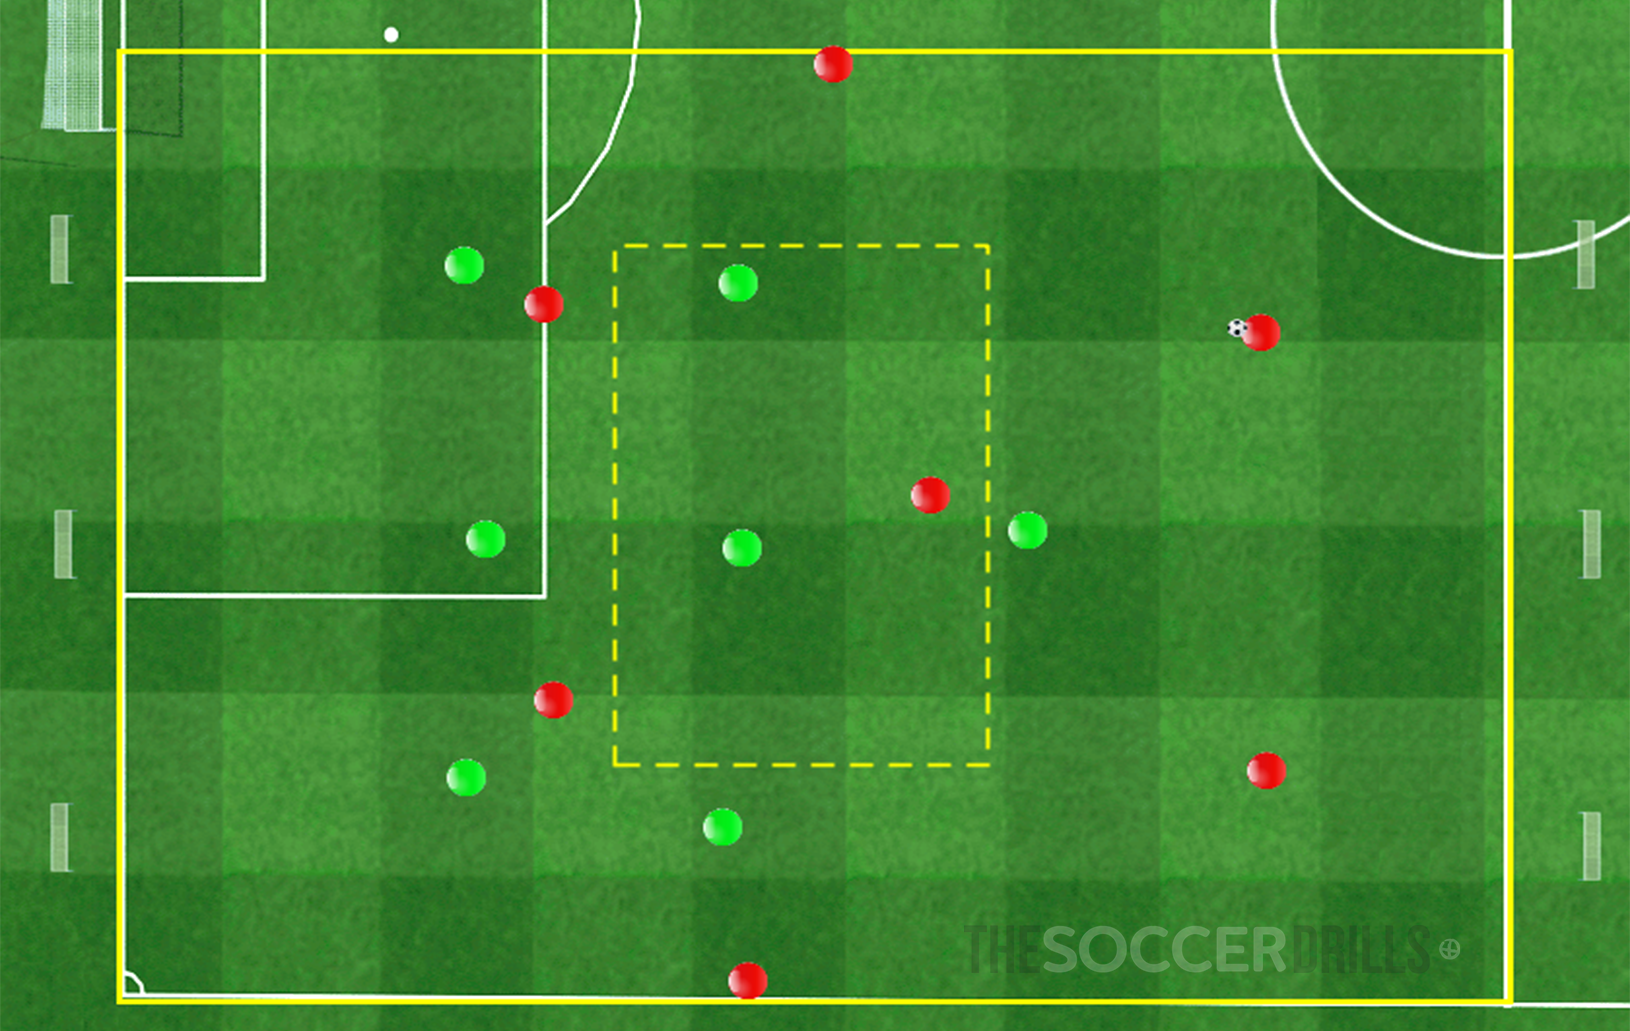 Small Sided Game, Soccer Drills for coaches, Soccer Drills for kds, Tactical Football Exercises, Tacical Soccer Drills, Drills for counterattack, Possesion possesion drills soccer, Small-Sided Soccer Games,